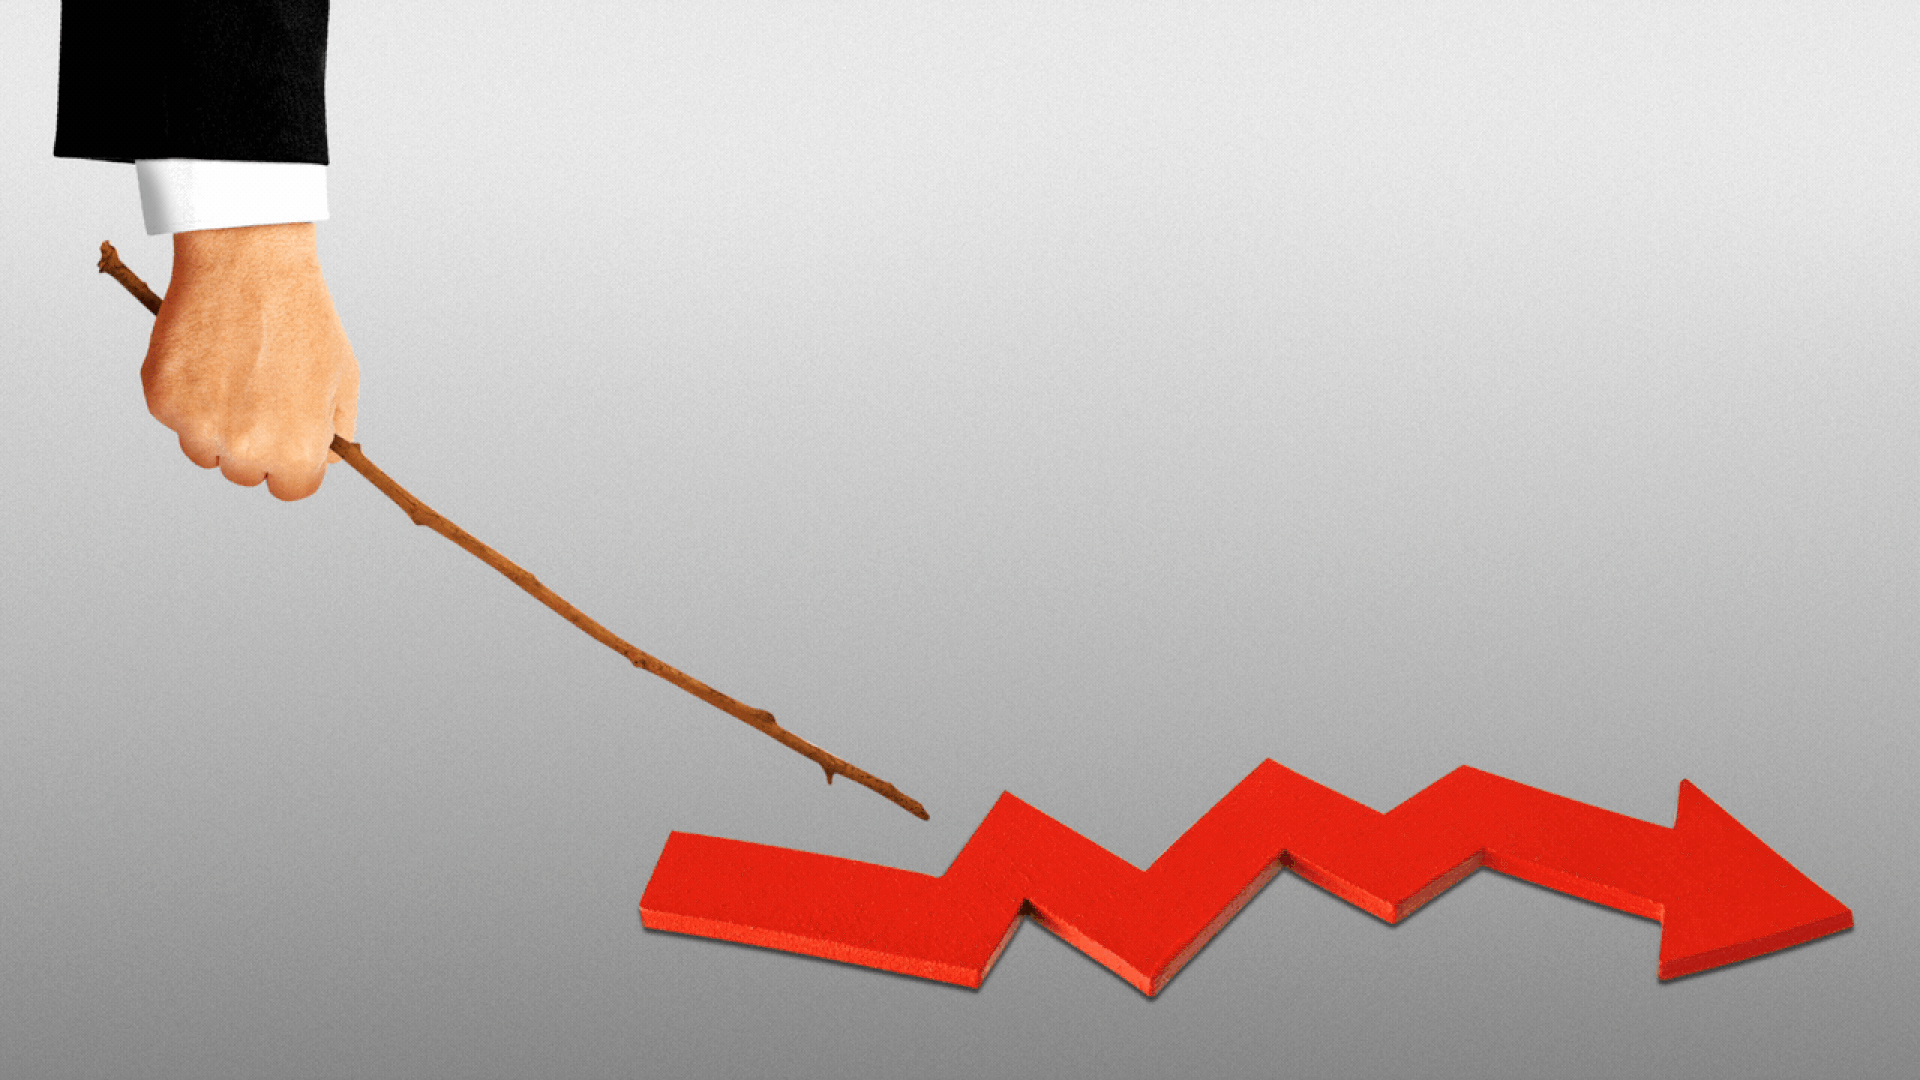 Animated illustration of a hand holding a stick poking at a market trend arrow on the ground. 